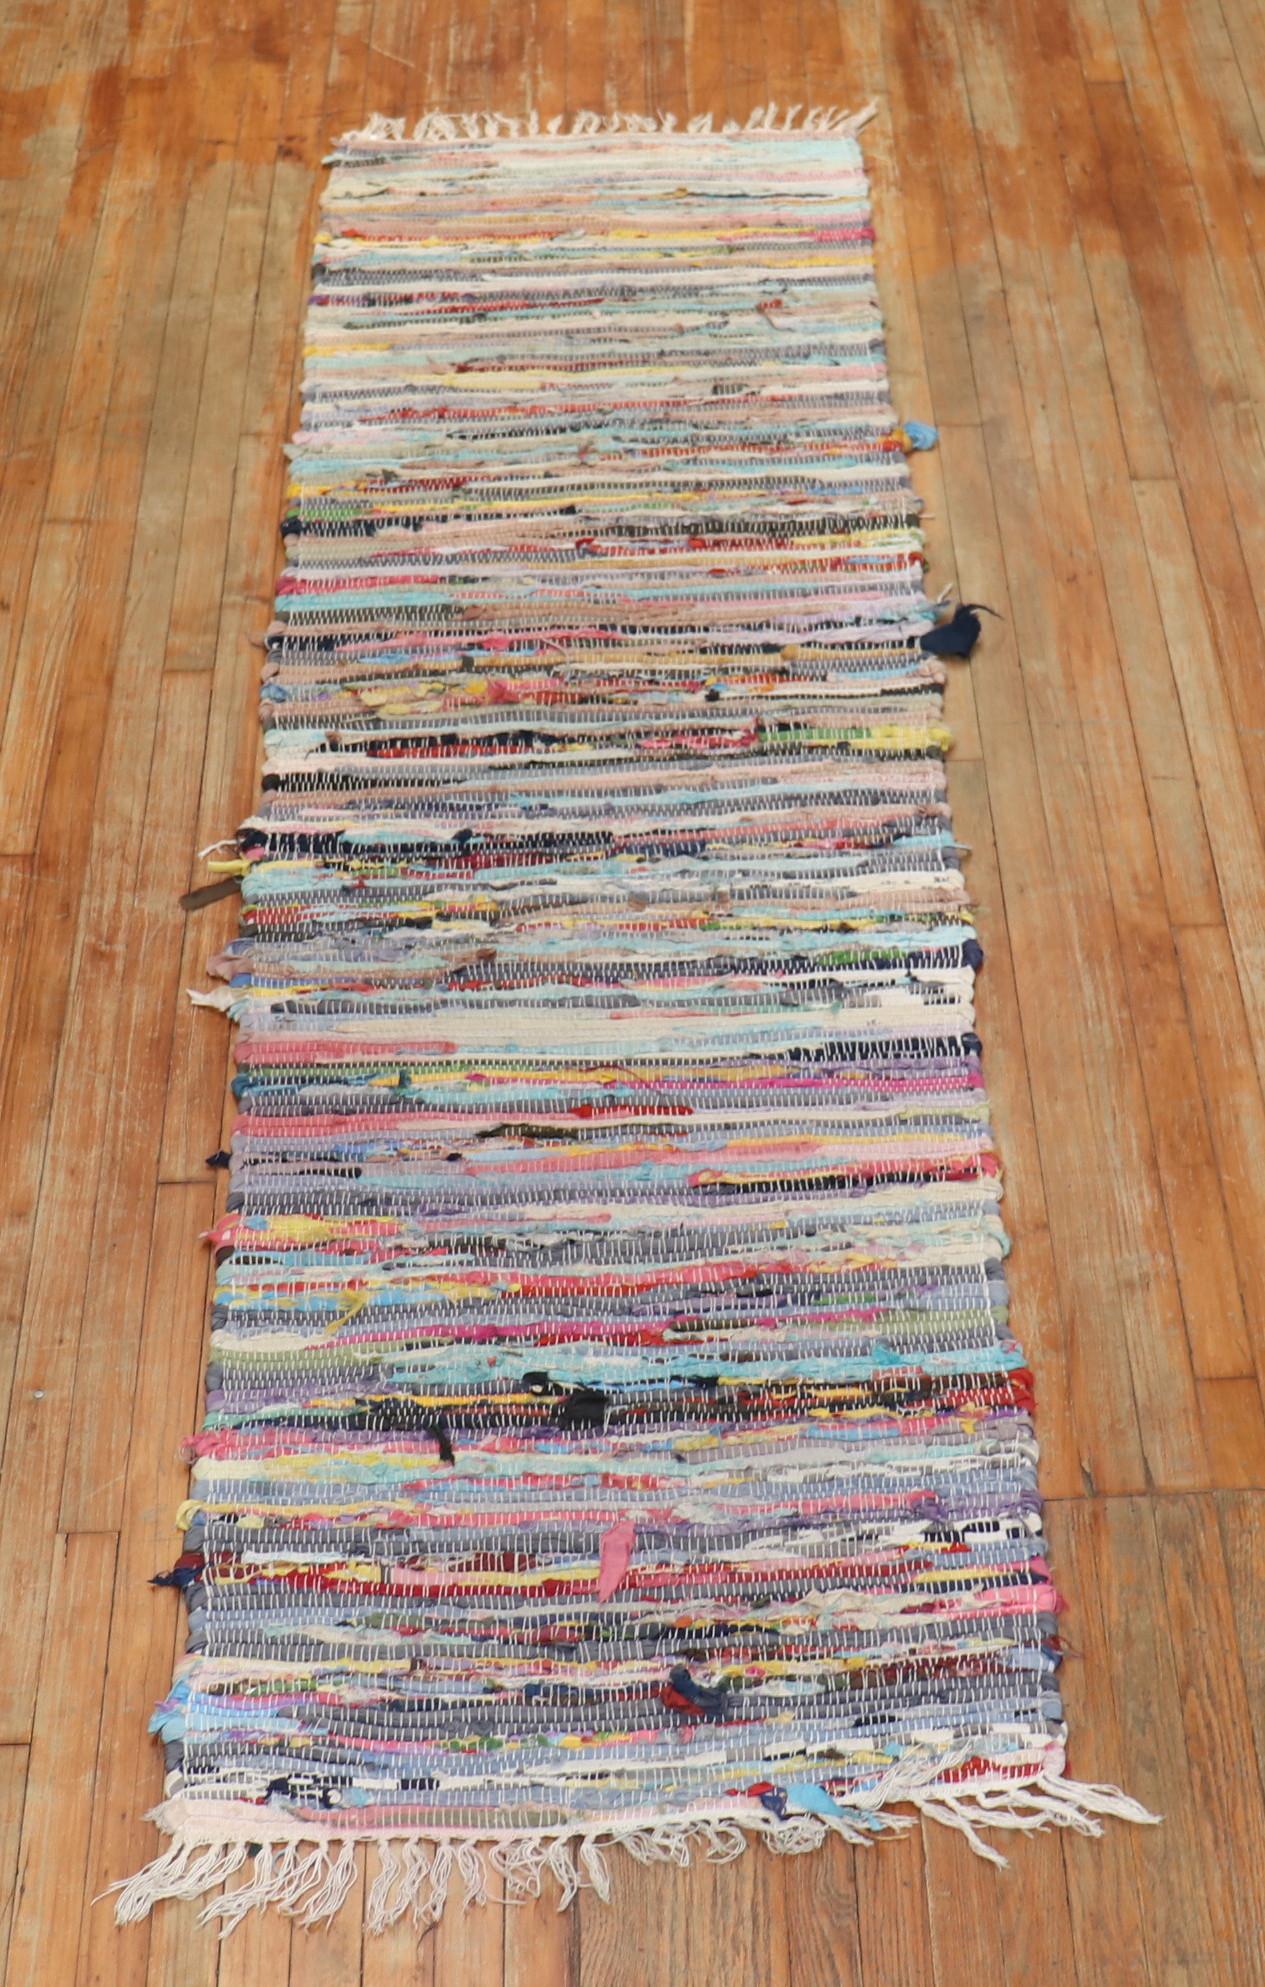 One of a kind colorful American Braid runner from the late 20th century

Measures: 2'6'' x 9'1''

American Braided rugs provided a way for people to make use of fabrics from other worn goods (clothing, storage sacks, bedding, etc) in creative